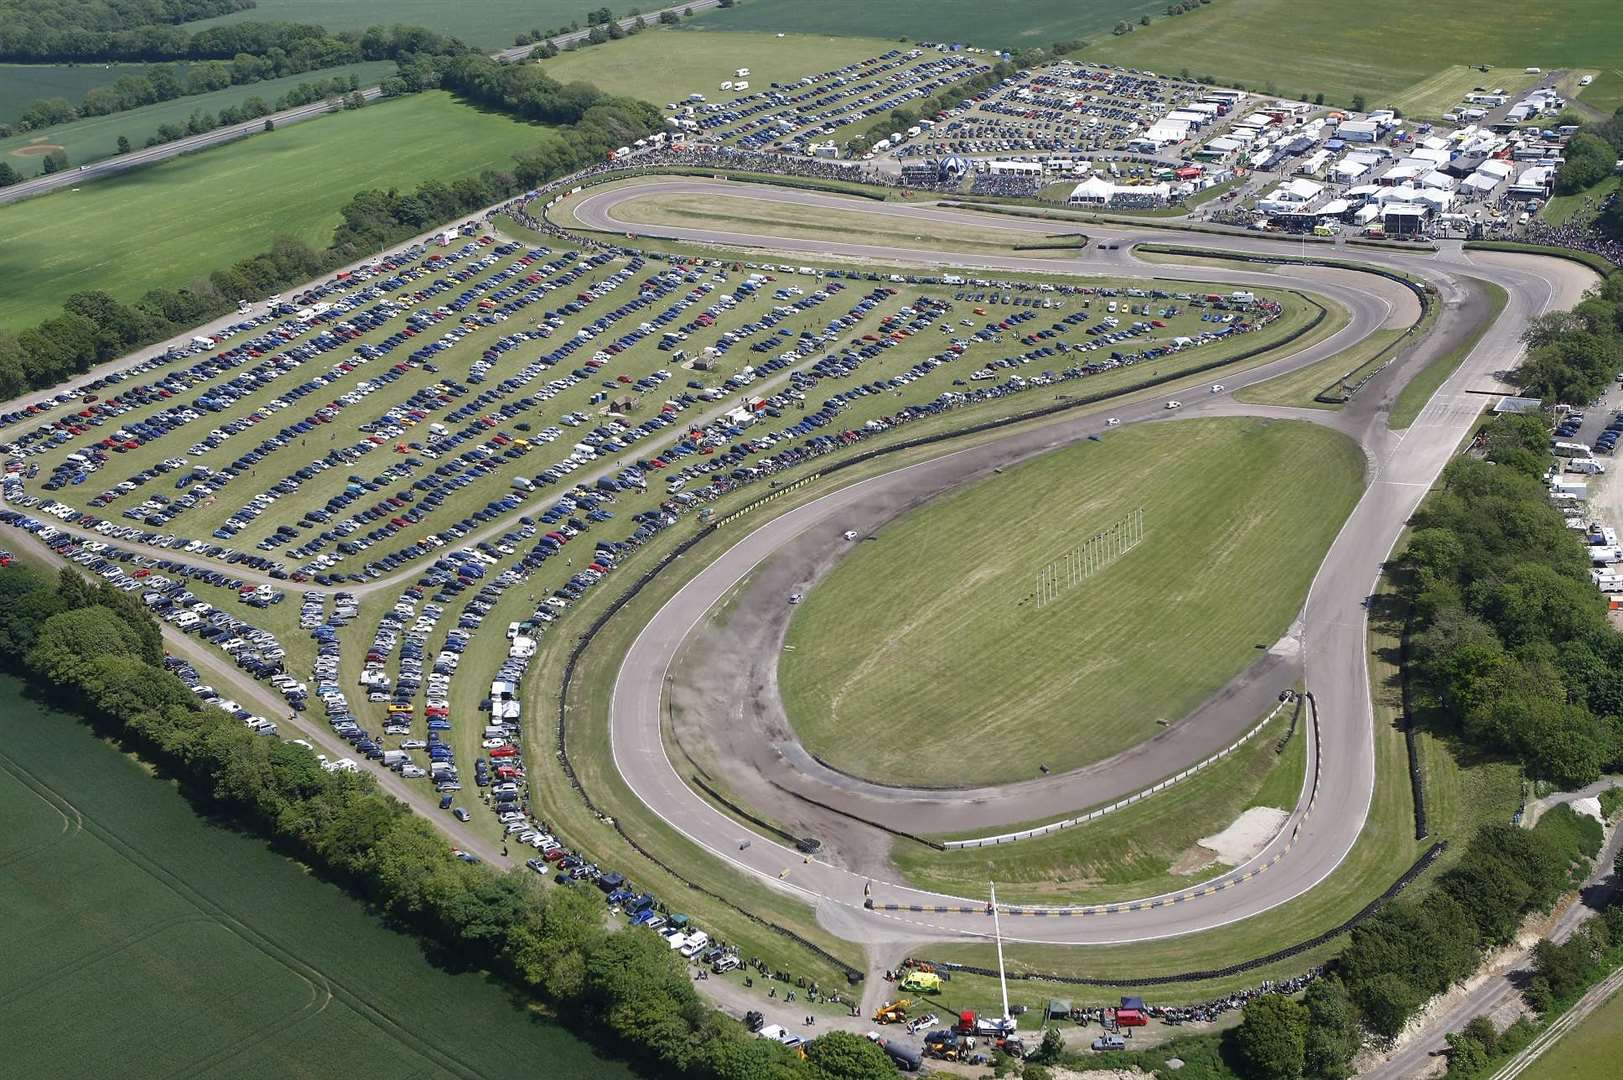 Major changes are planned for the circuit. Picture: Matt Bristow